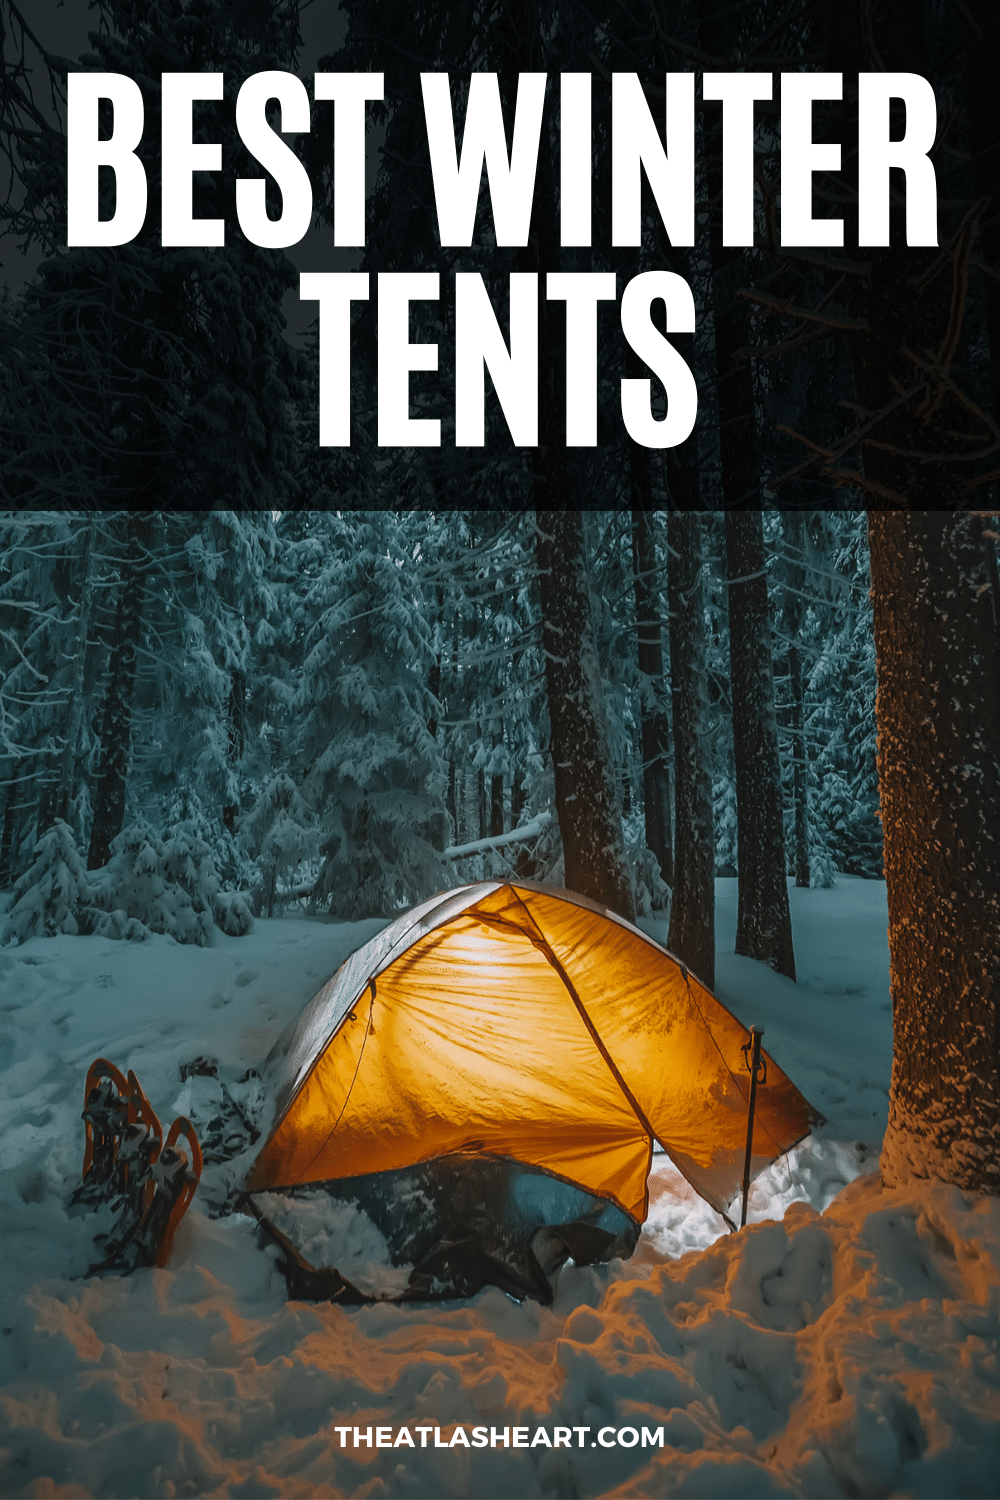 12 Best Winter Tents for Cold Weather Camping (2022 Buying Guide)